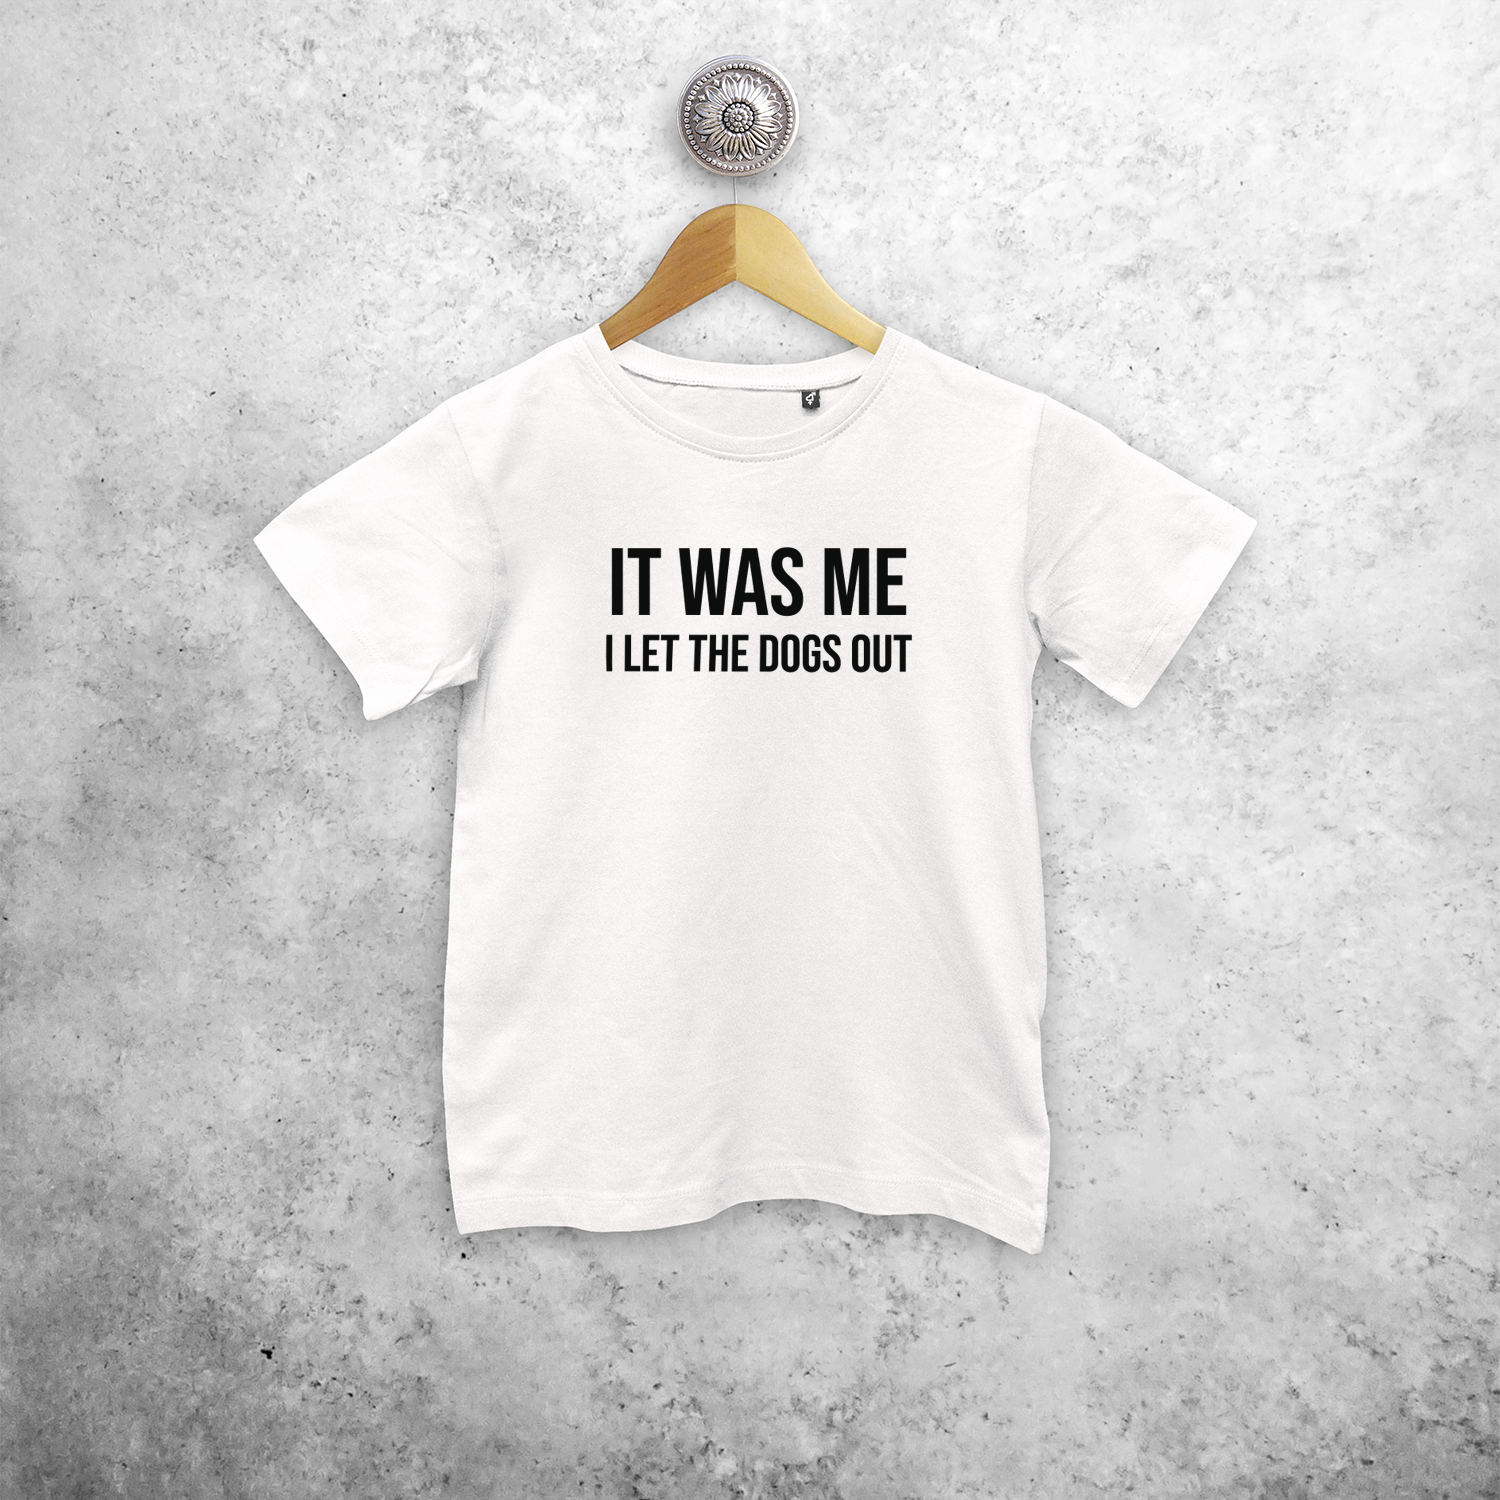 'It was me - I let the dogs out' kids shortsleeve shirt